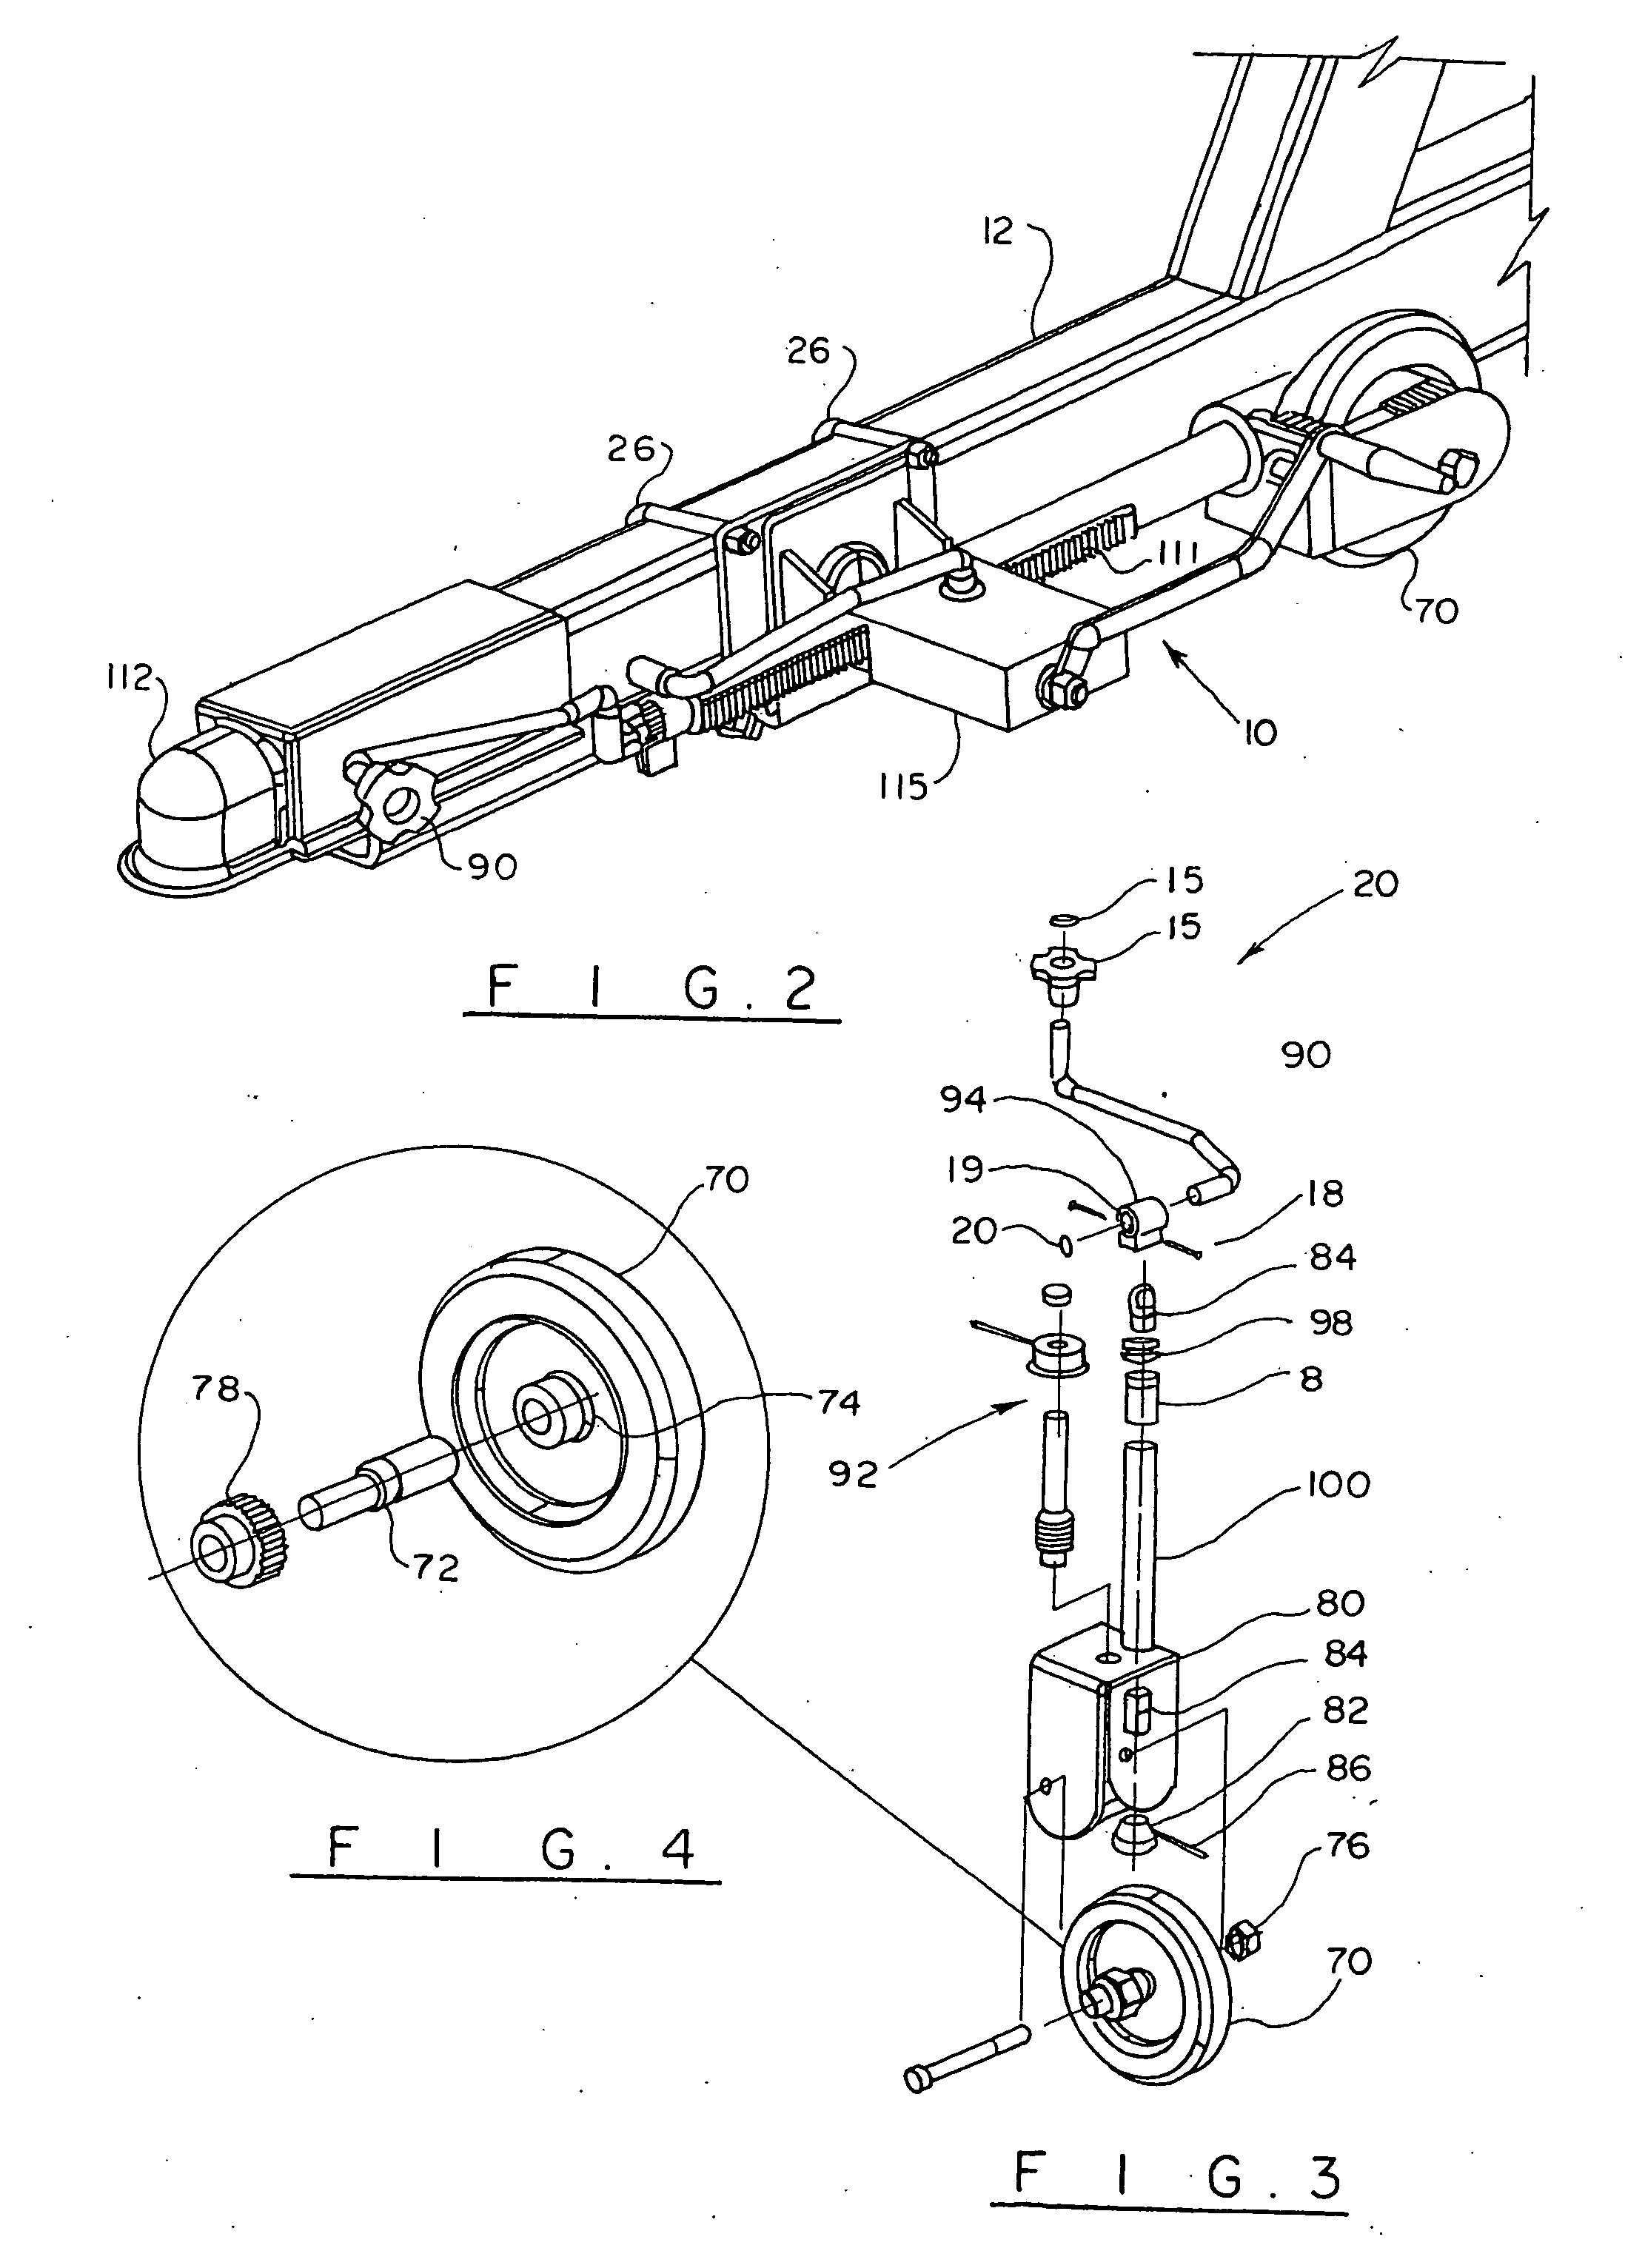 Connector assembly for a trailer